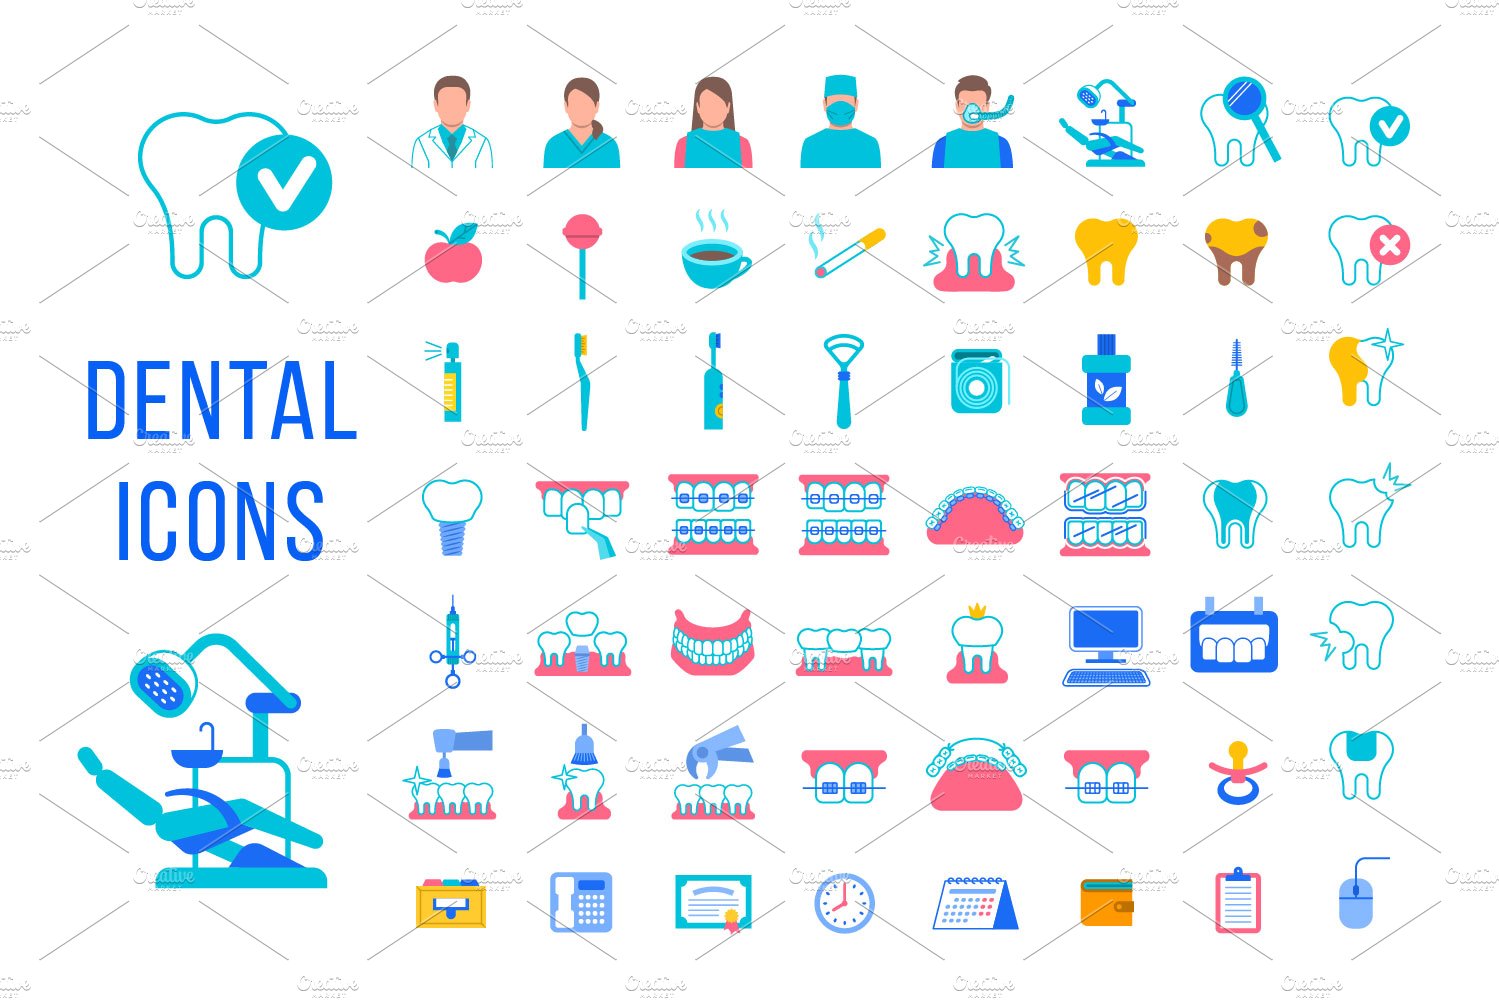 Dental Clinic Services Flat Icons cover image.